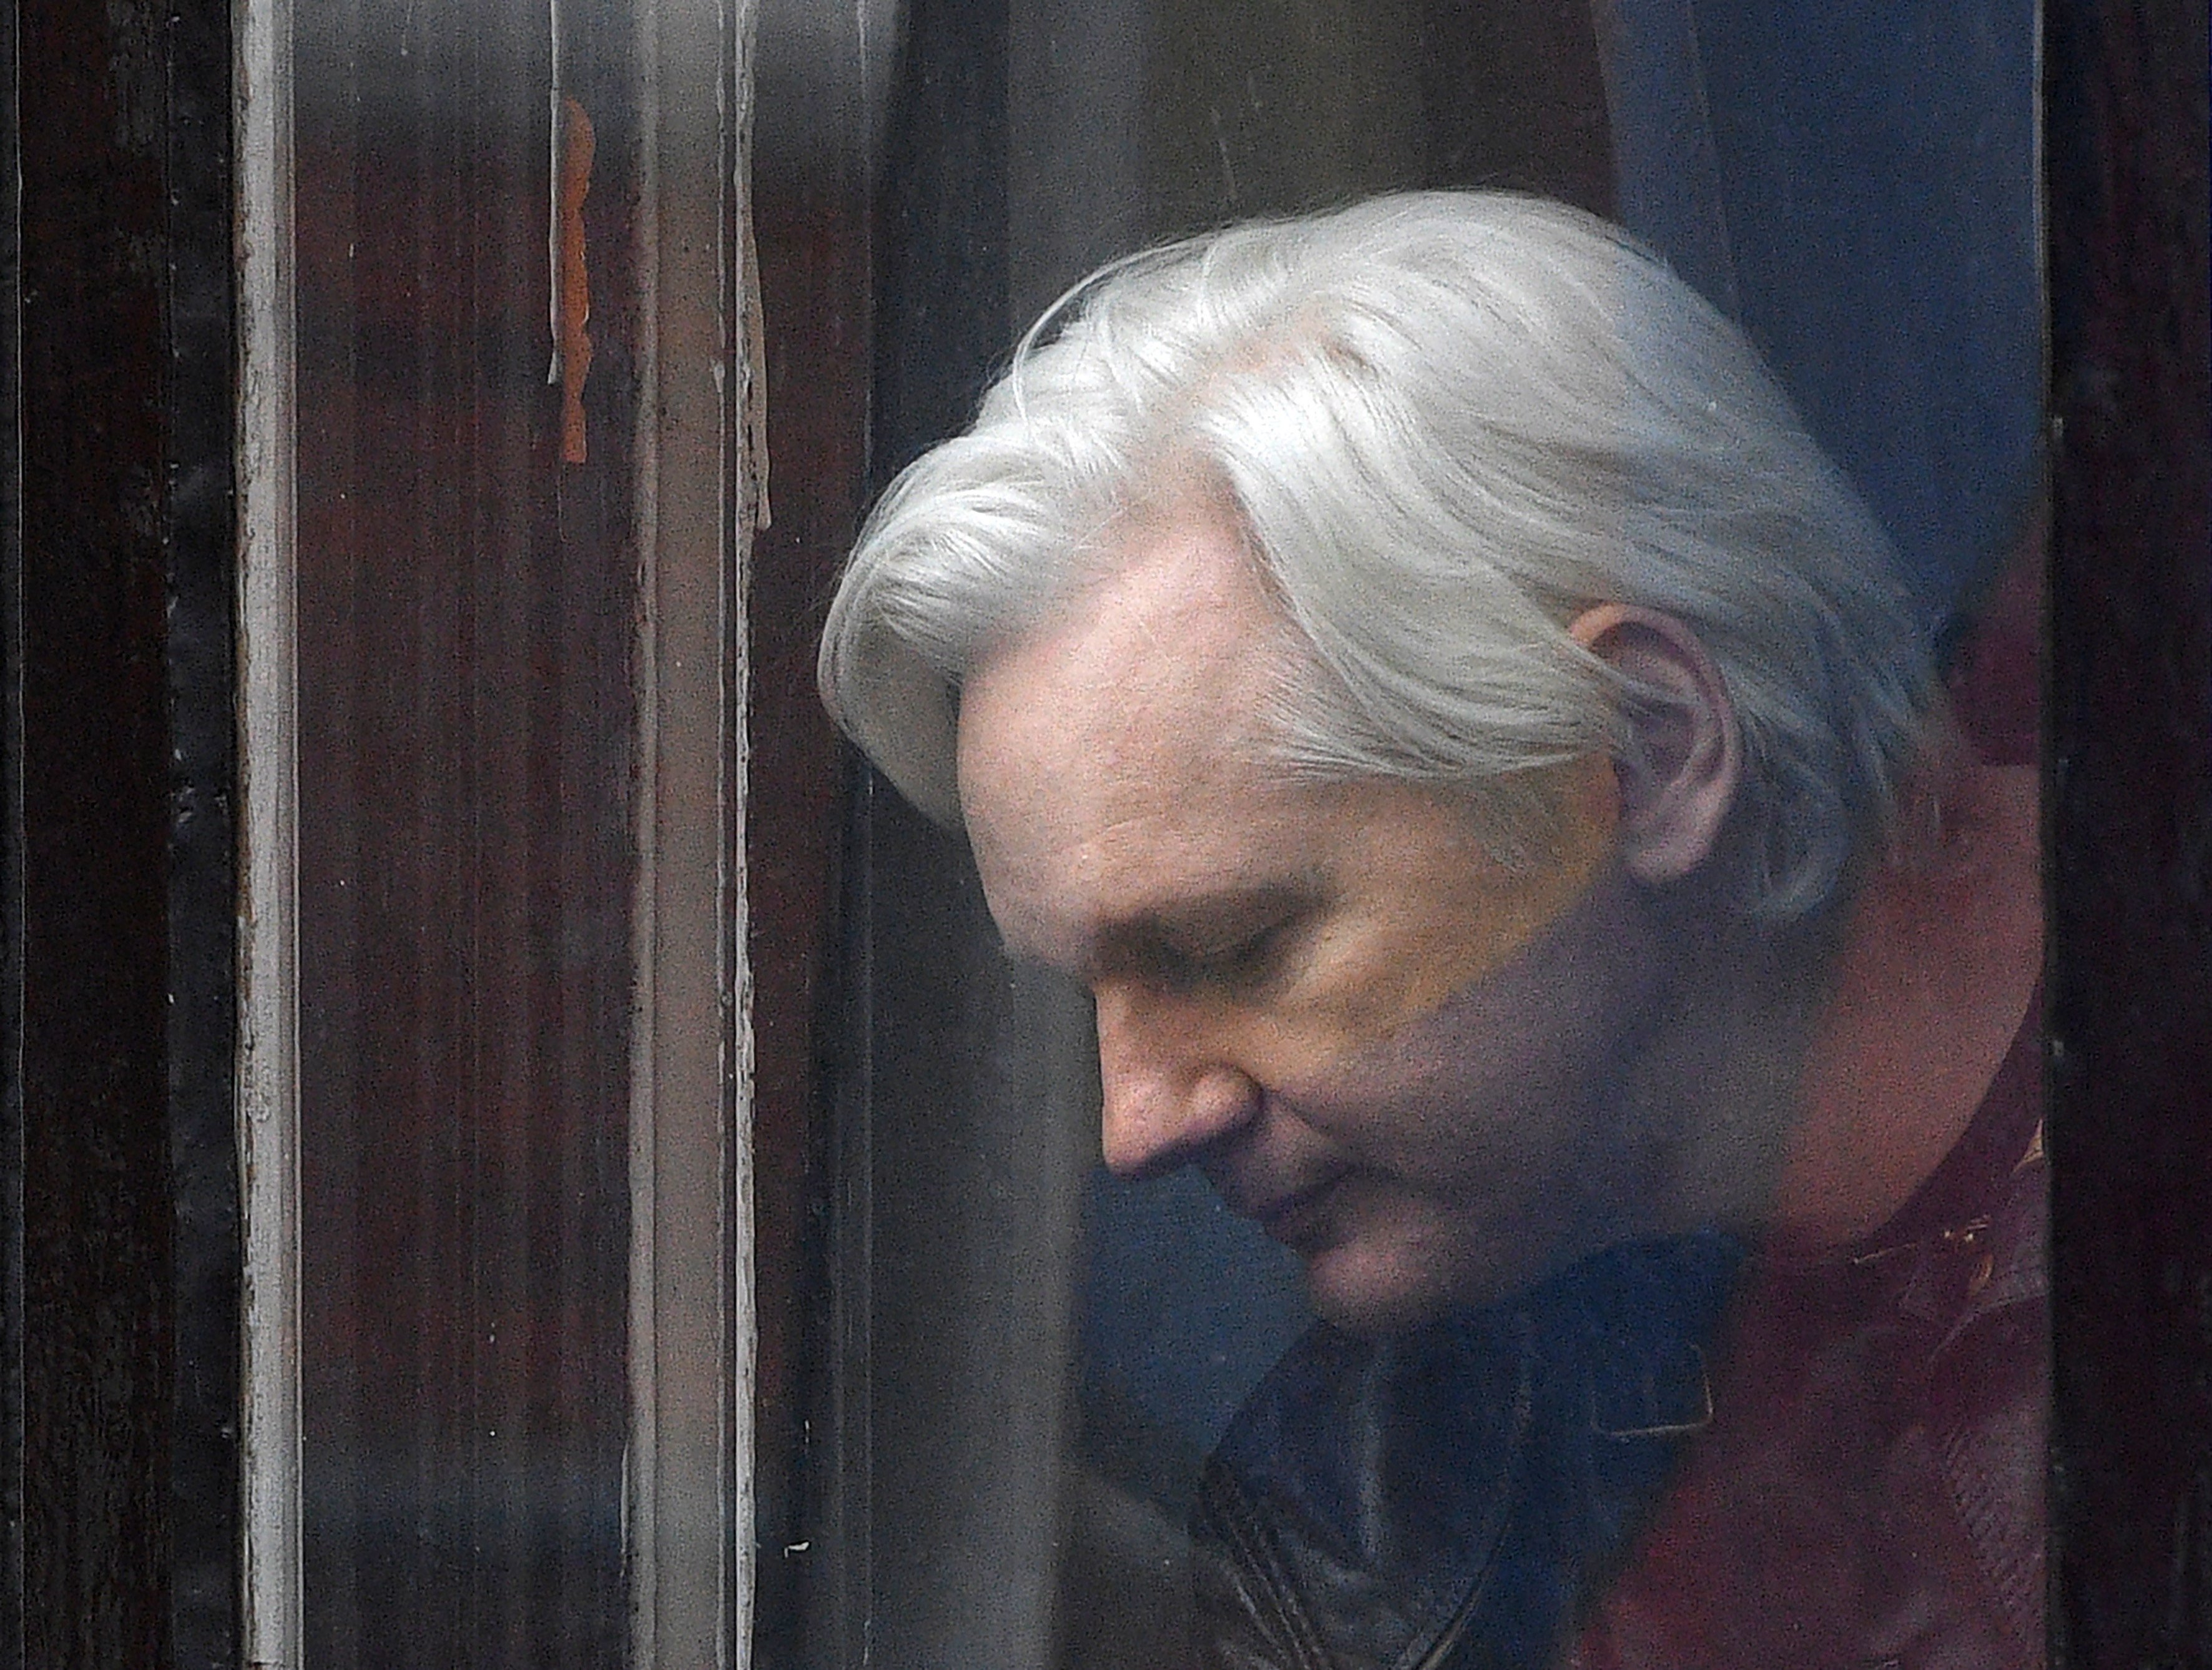 WikiLeaks founder Julian Assange was given permission to have a full appeal over his extradition to the United States after arguing at London’s High Court on Monday he might not be able to rely on his right to free speech at a trial. Photo: EPA-EFE